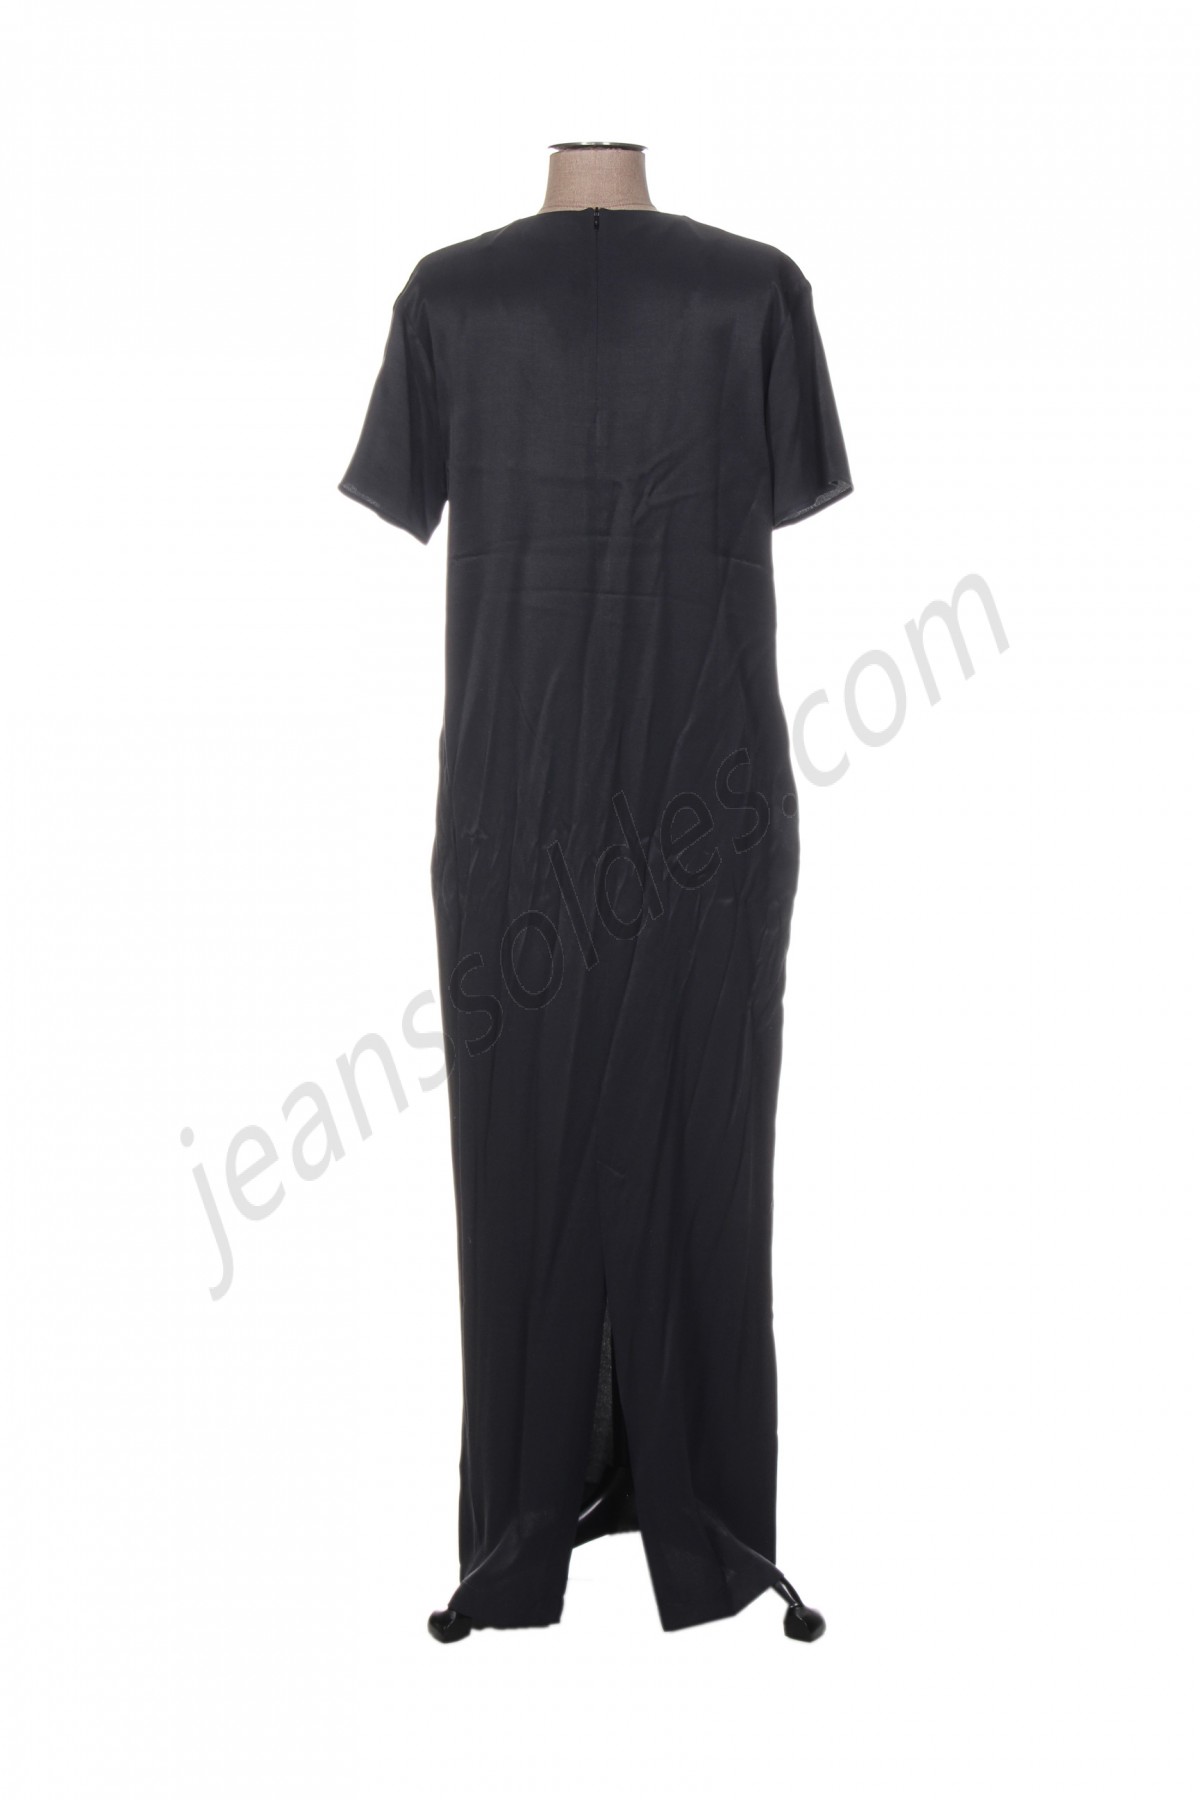 just in case-Robe longue déstockage - -1